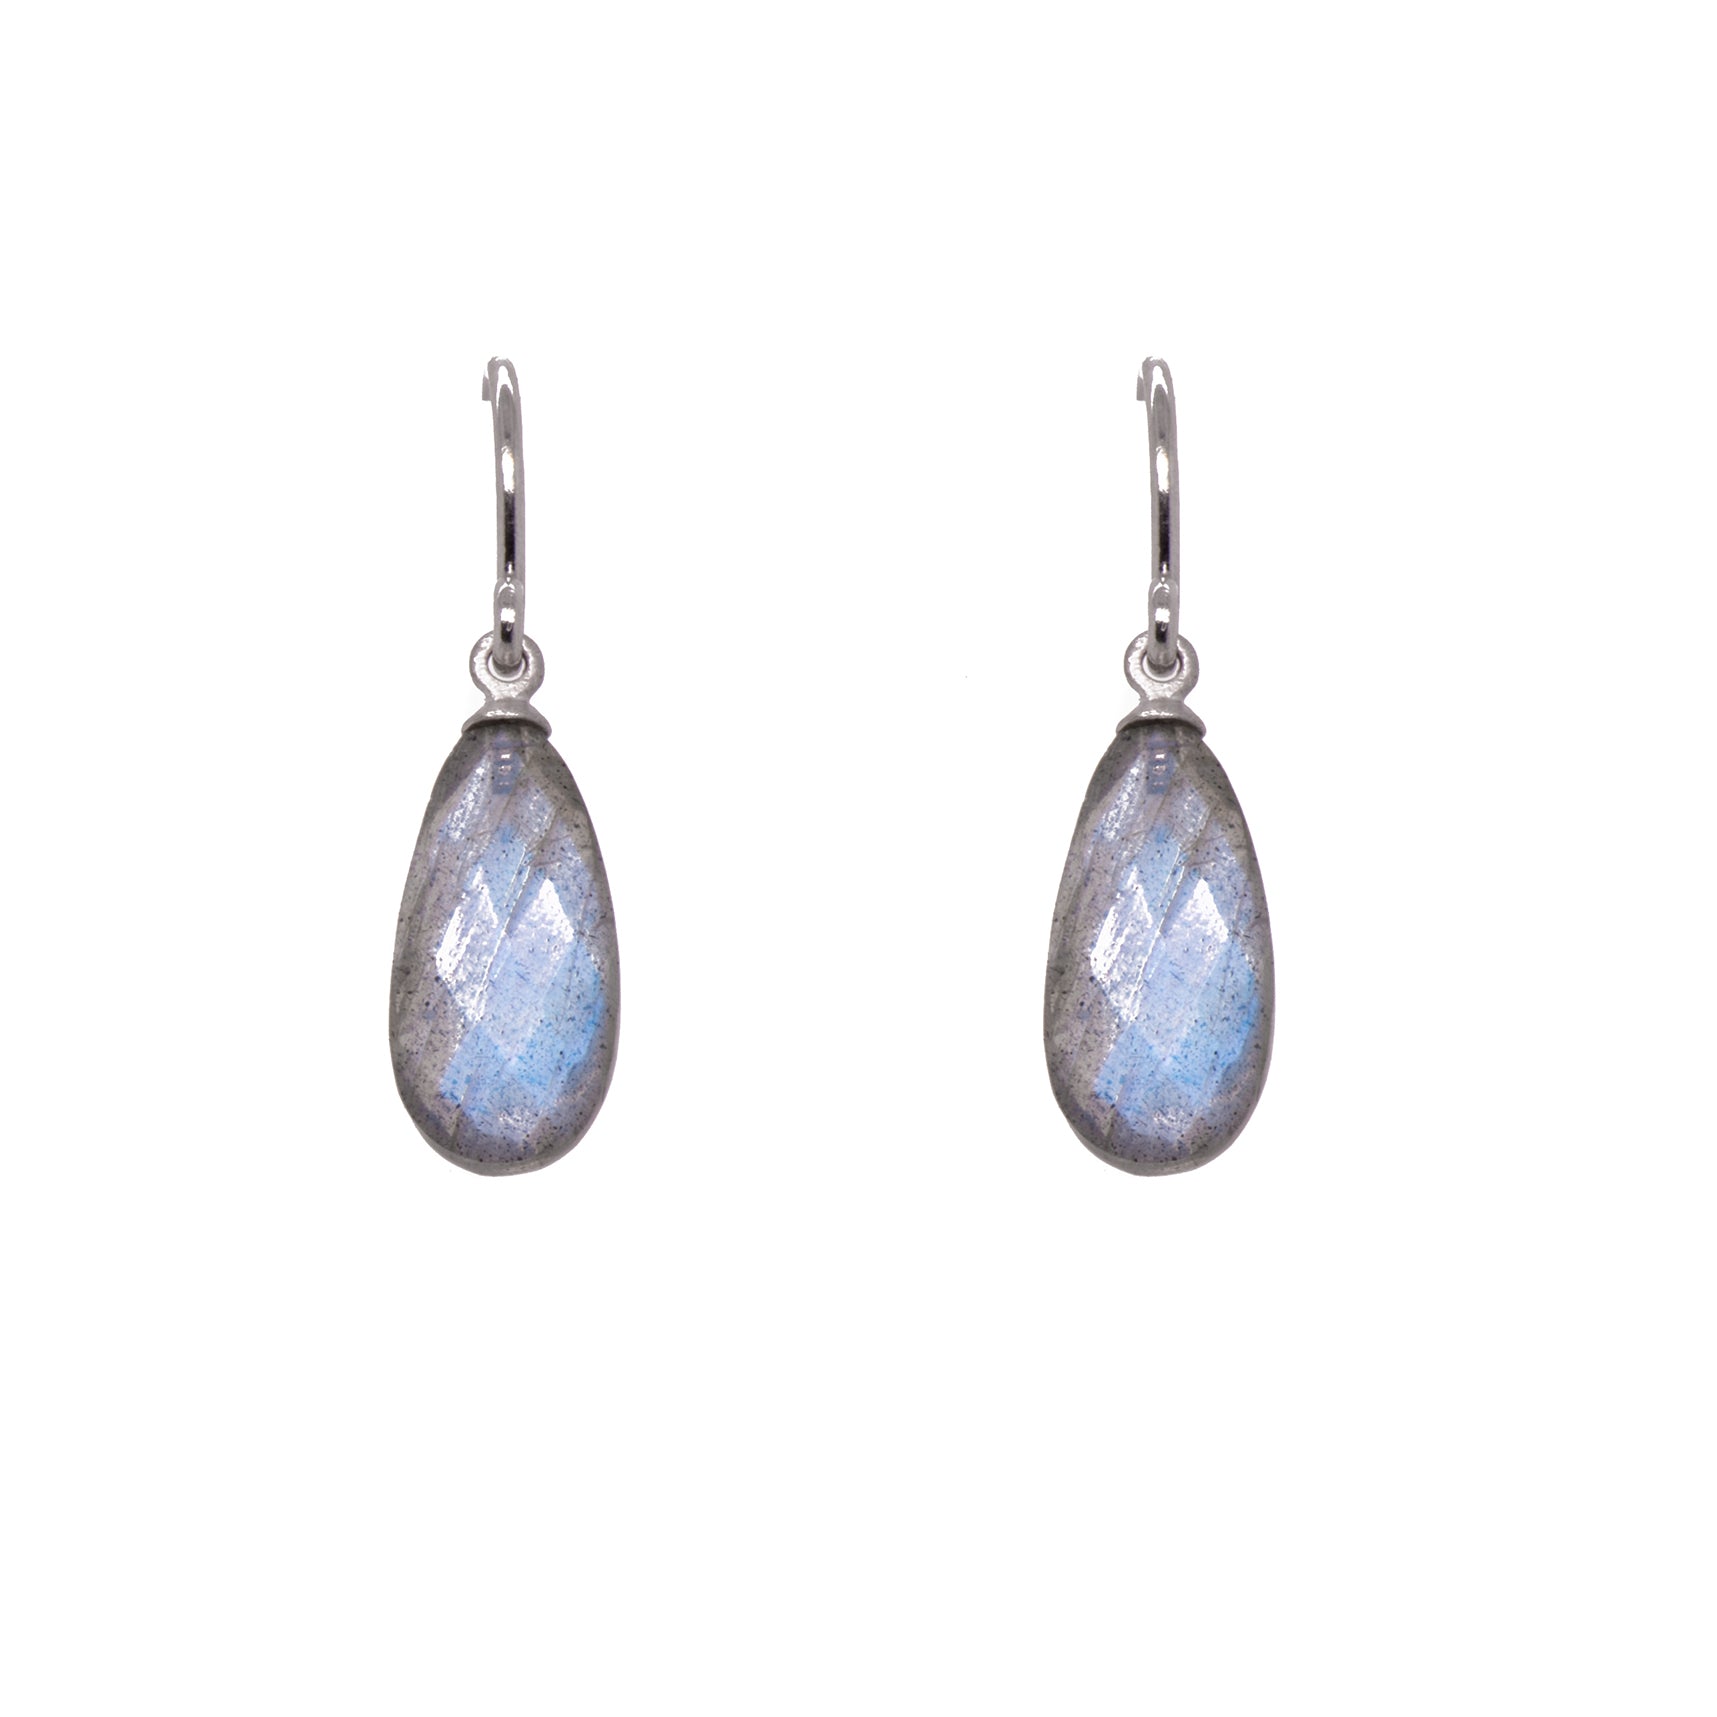 Labradorite Faceted Joyful Signature Wire Earrings Silver Rhodium Plated